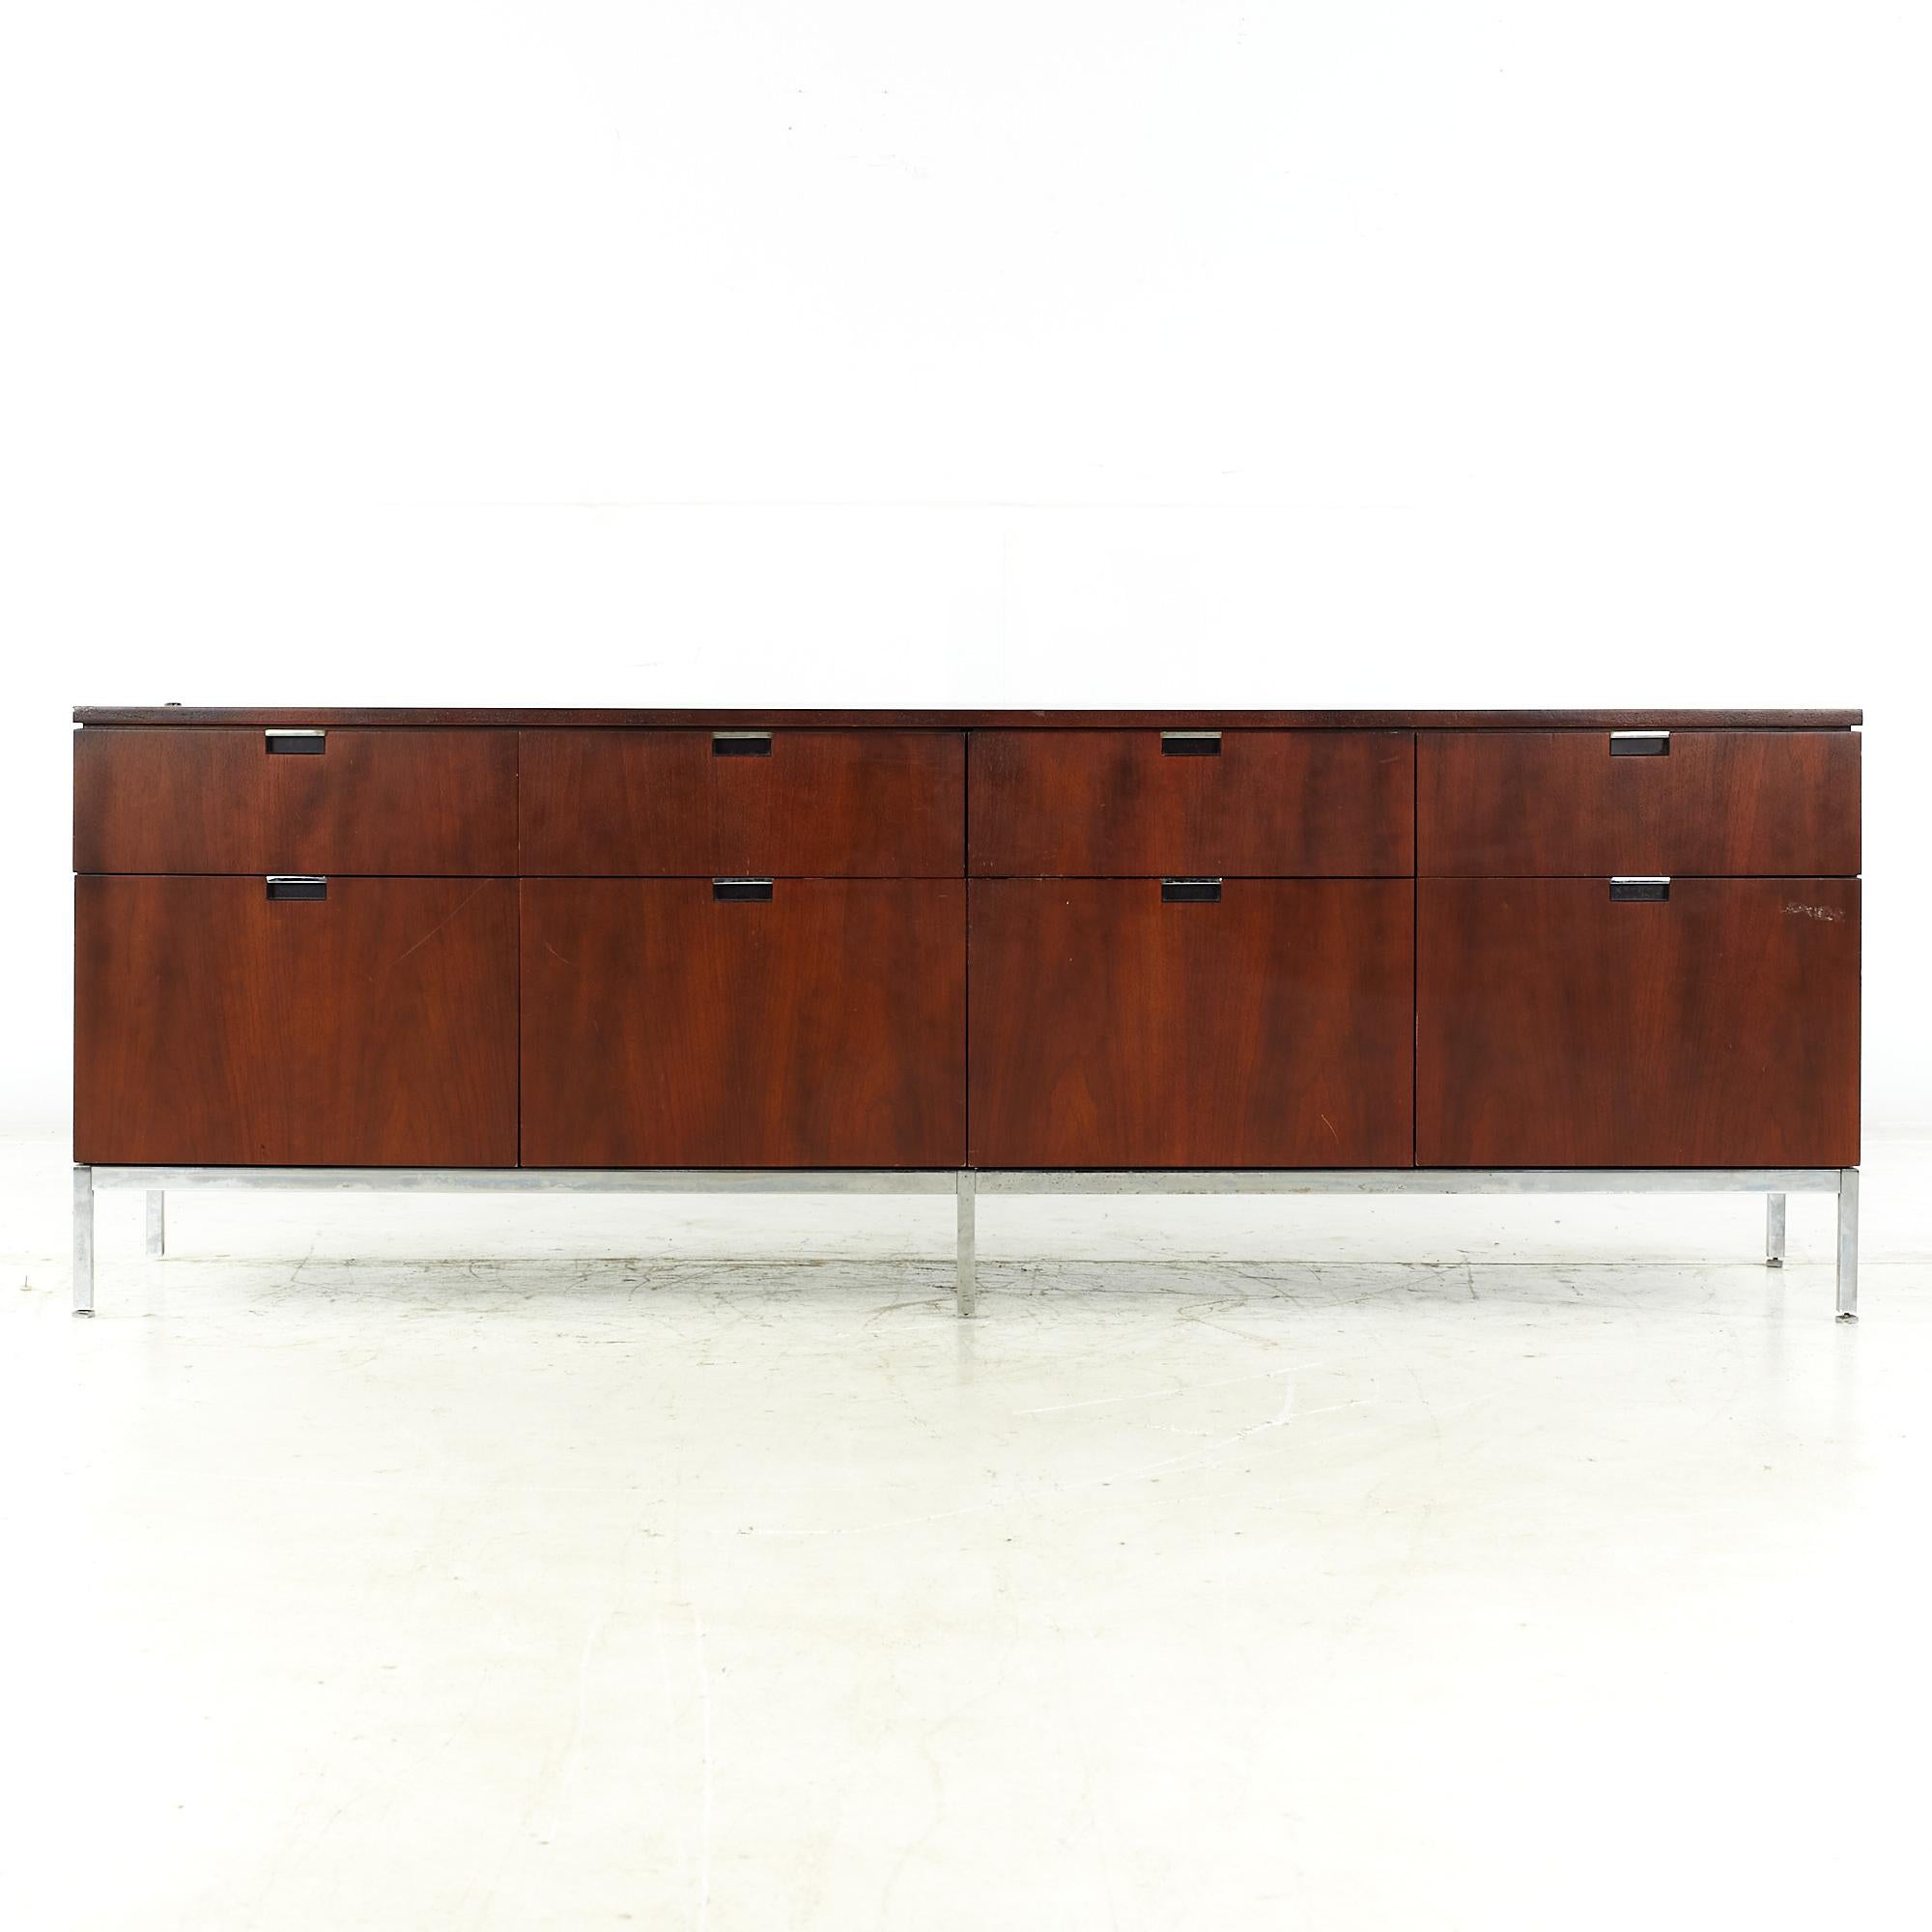 Florence Knoll mid-century walnut and chrome credenza.

This credenza measures: 74.5 wide x 18 deep x 25.75 inches high.

All pieces of furniture can be had in what we call restored vintage condition. That means the piece is restored upon